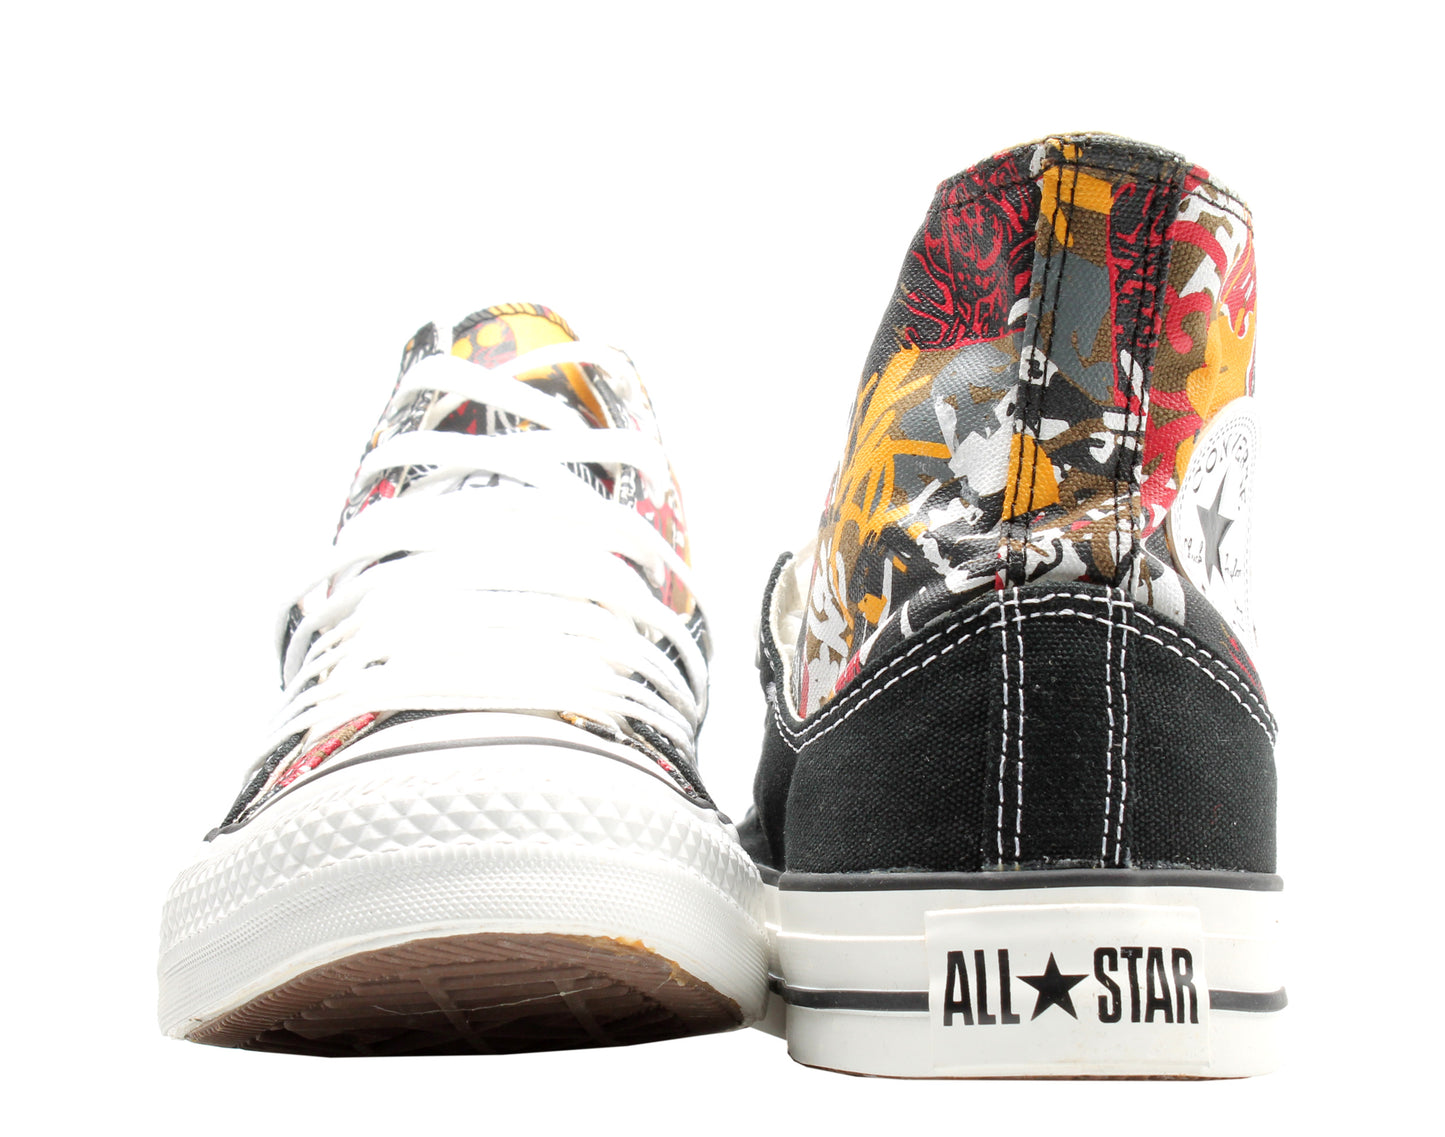 Converse Chuck Taylor All Star Layer Up Graffiti Black/Olive High Top Sneakers 113912